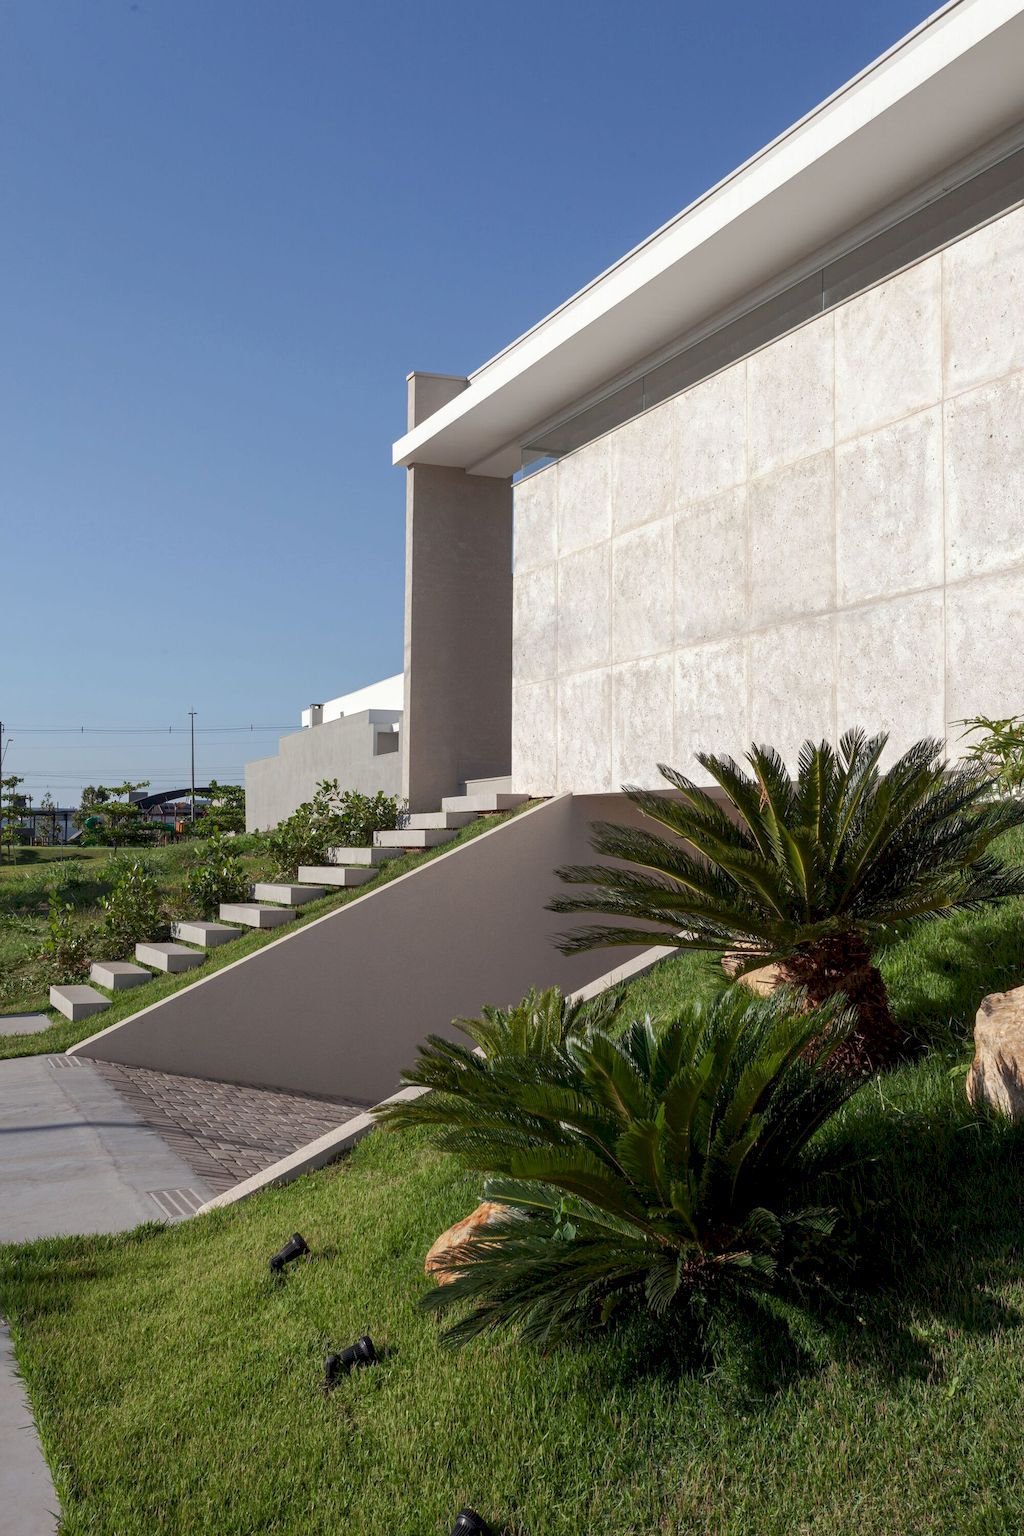 Casa EL, Elegant and Modern Leisure Home in Brazil by MBBR Arquitetos